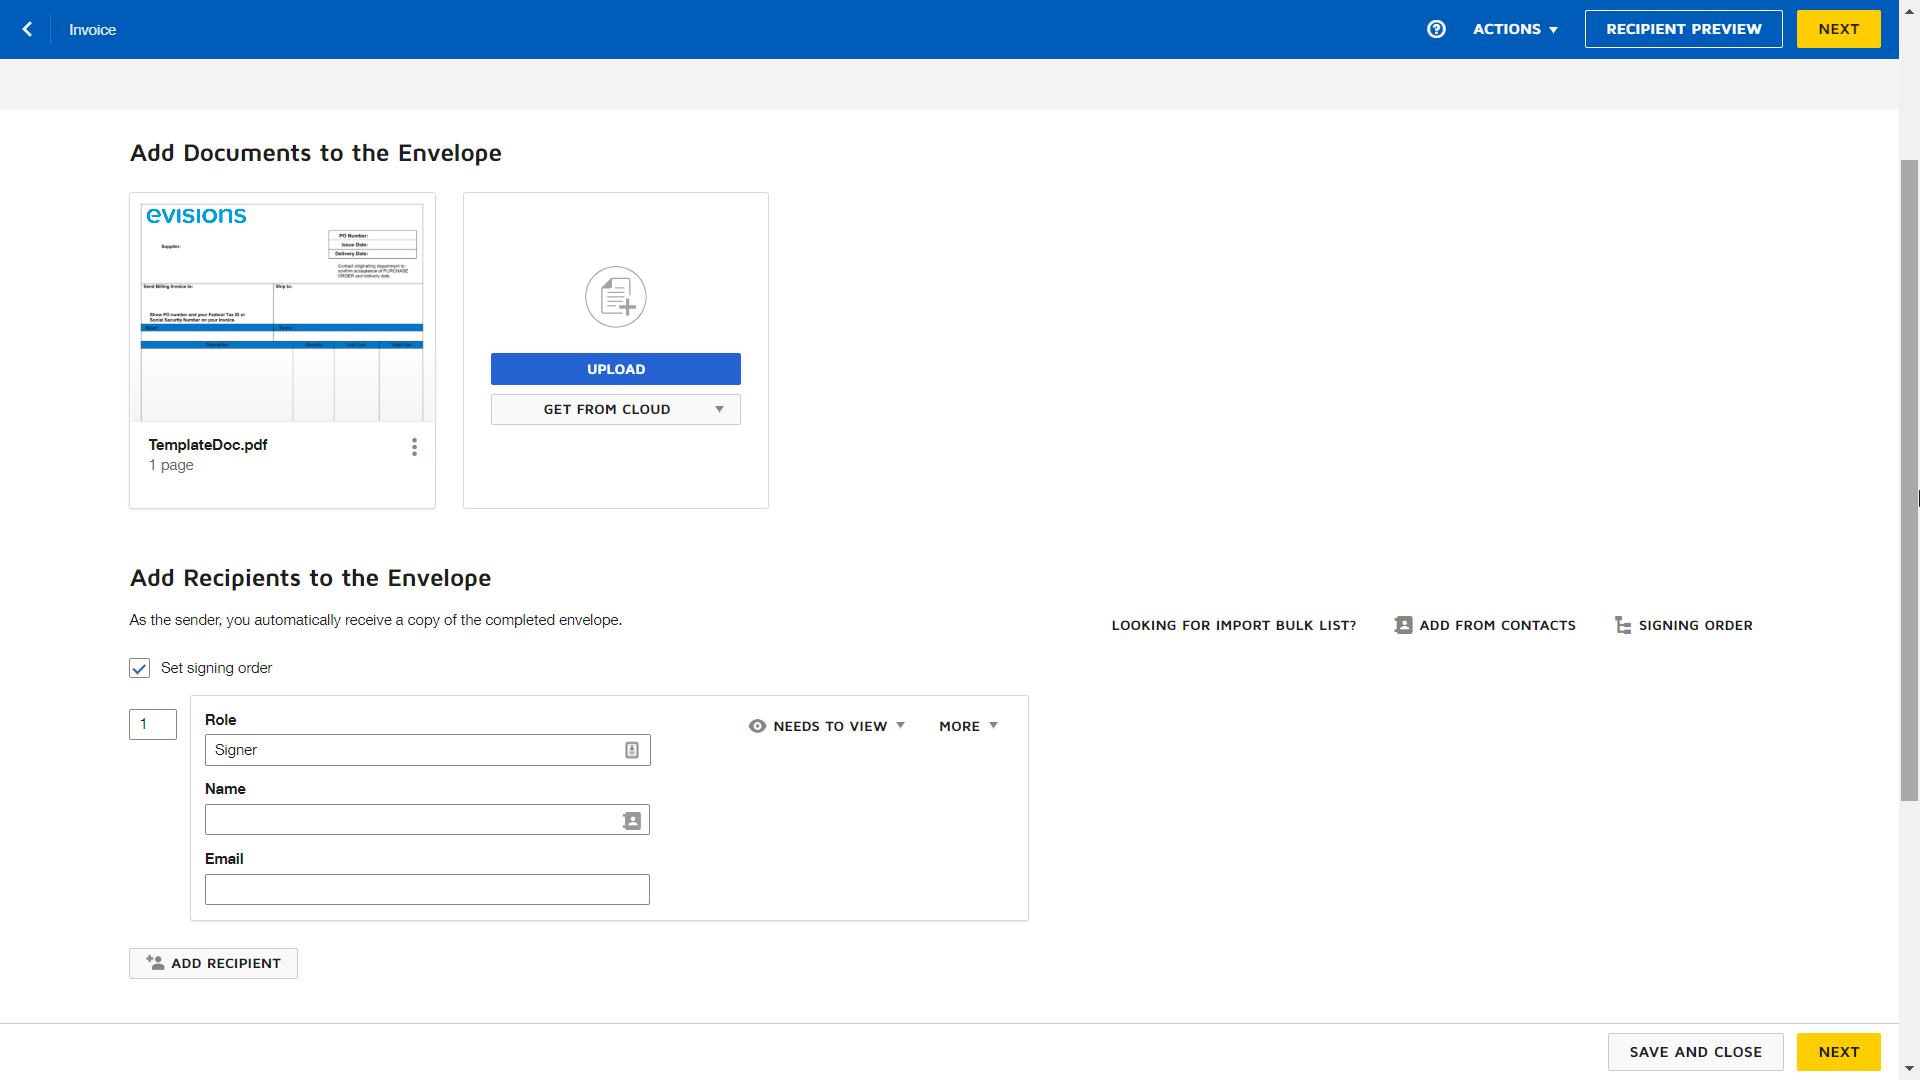 Edit Recipients screen in DocuSign showing the role, name, and email fields, action dropdown, and button to add additional recipients.